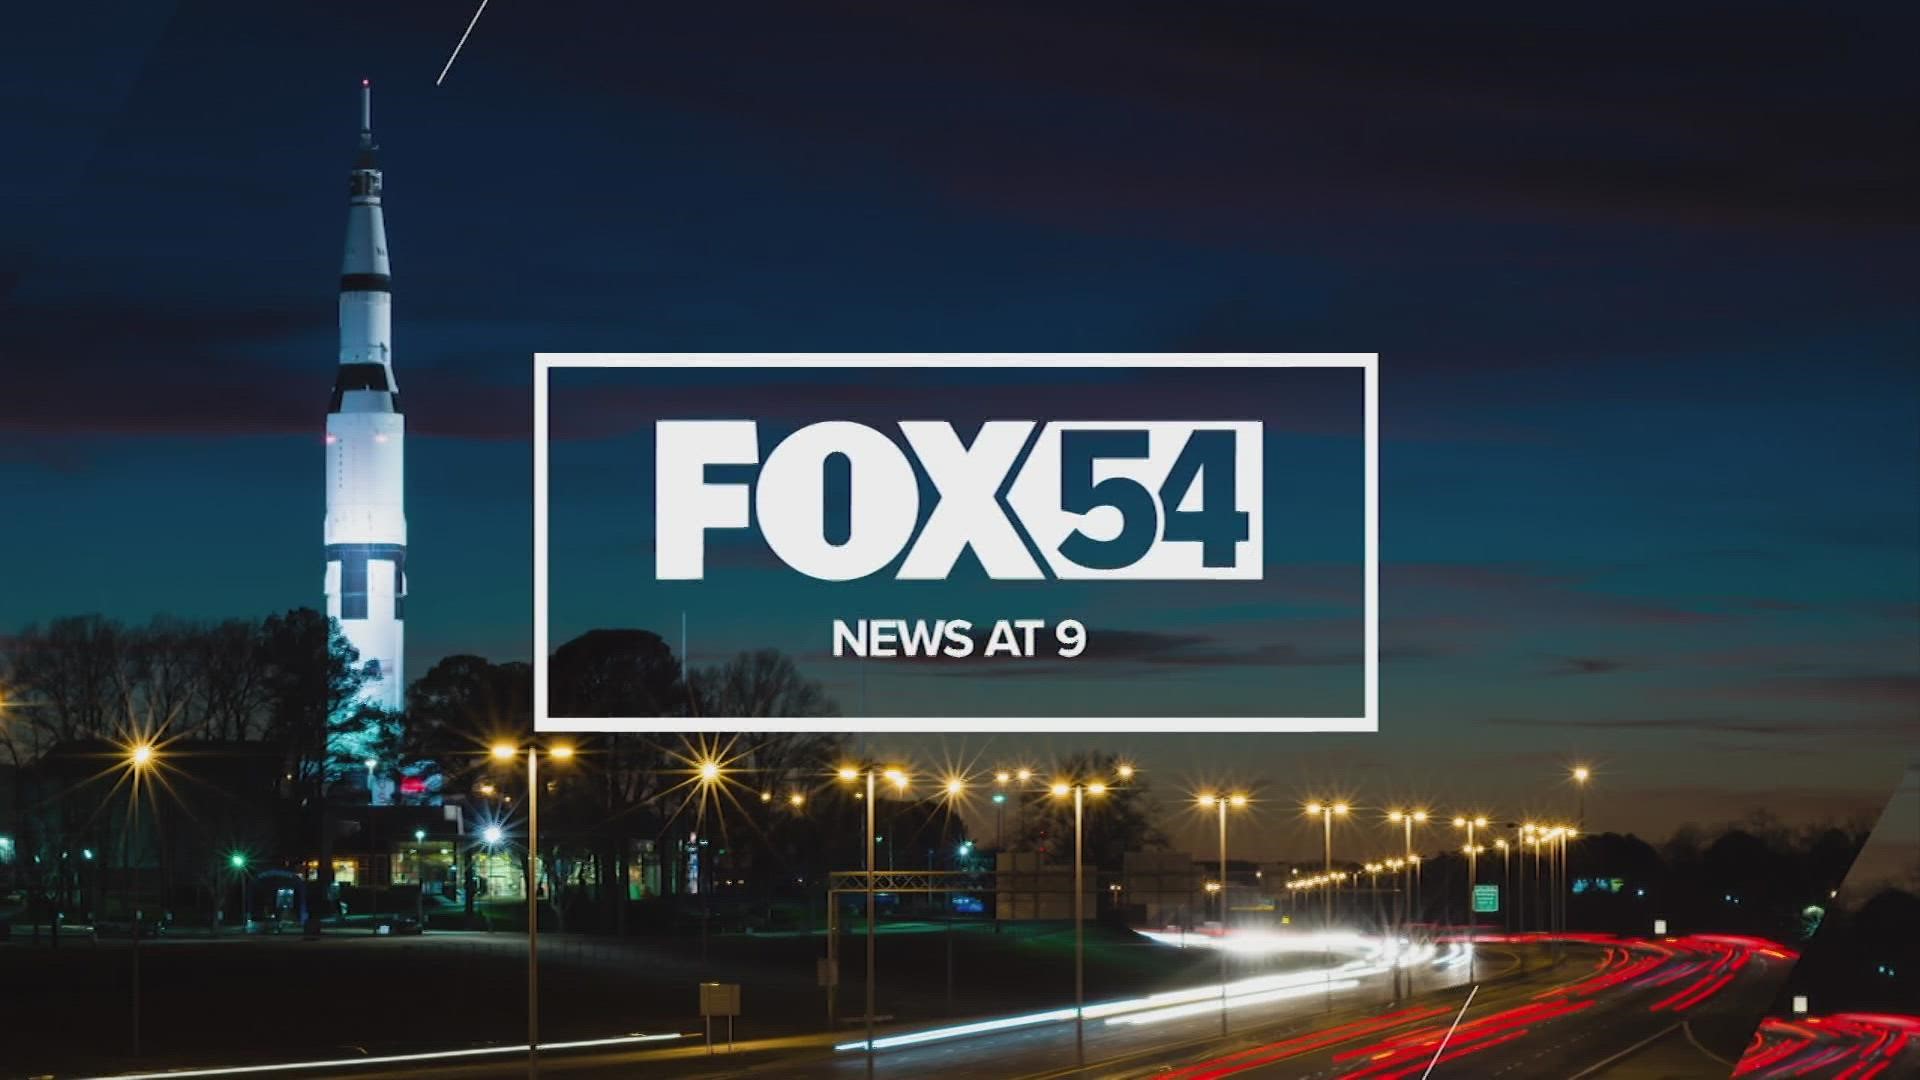 Watch the FOX54 News at 9:00.